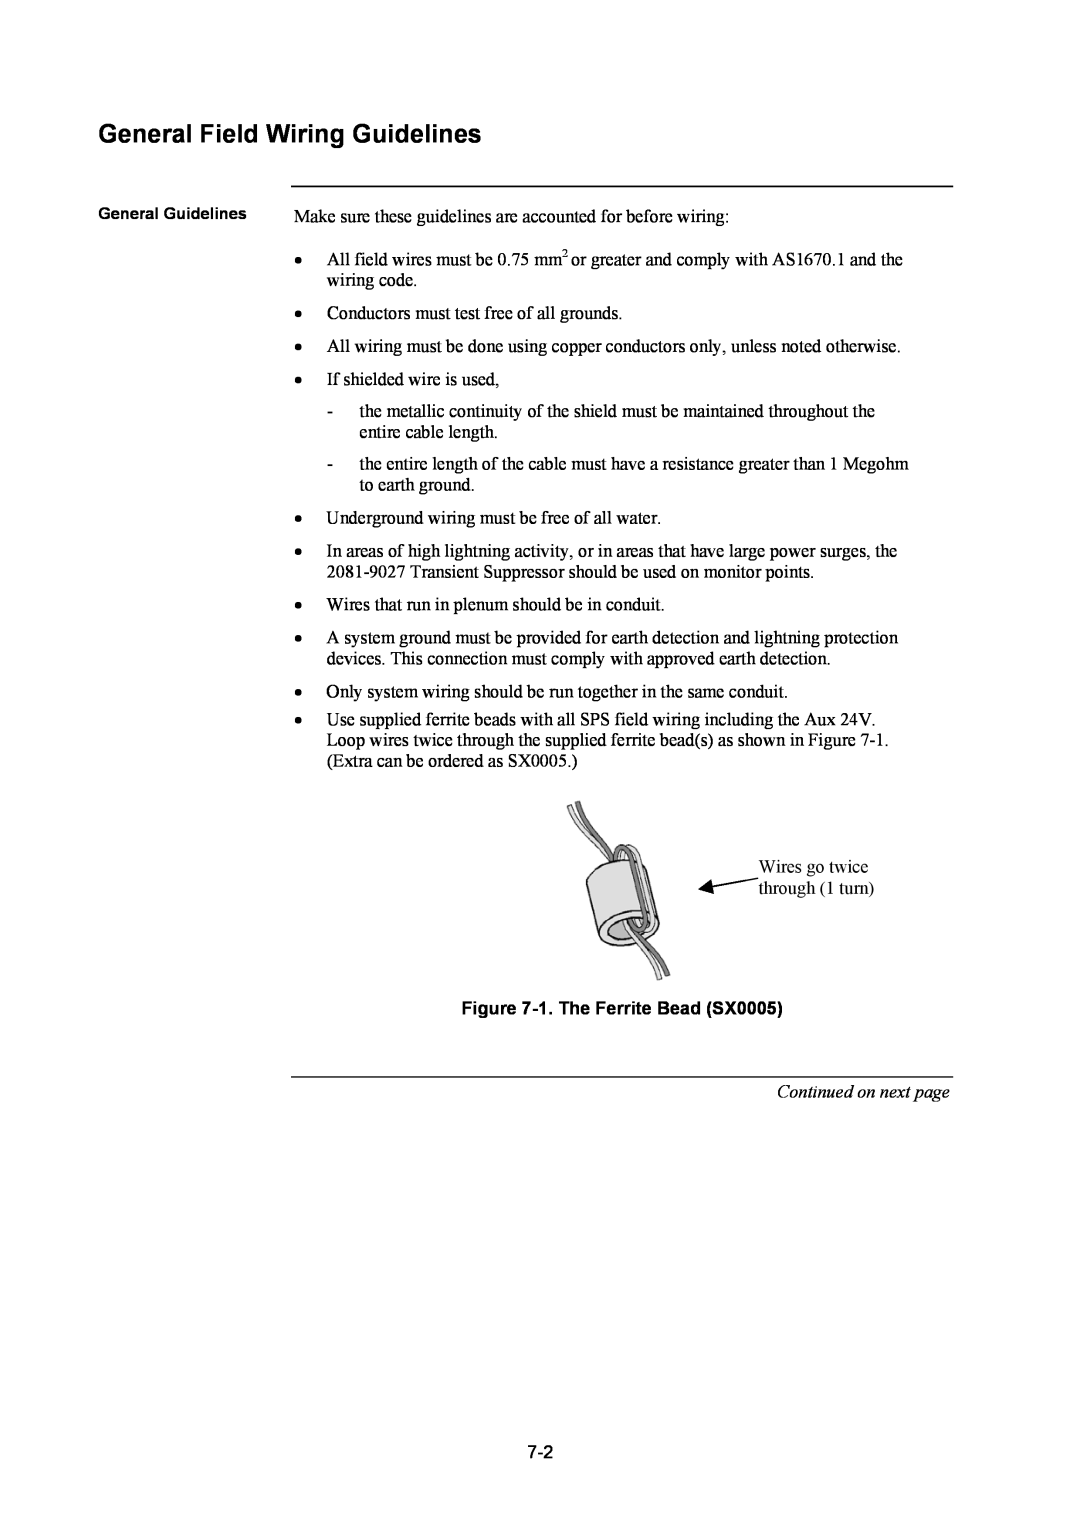 Tyco 4100U installation manual General Field Wiring Guidelines, 1.The Ferrite Bead SX0005, Continued on next page 